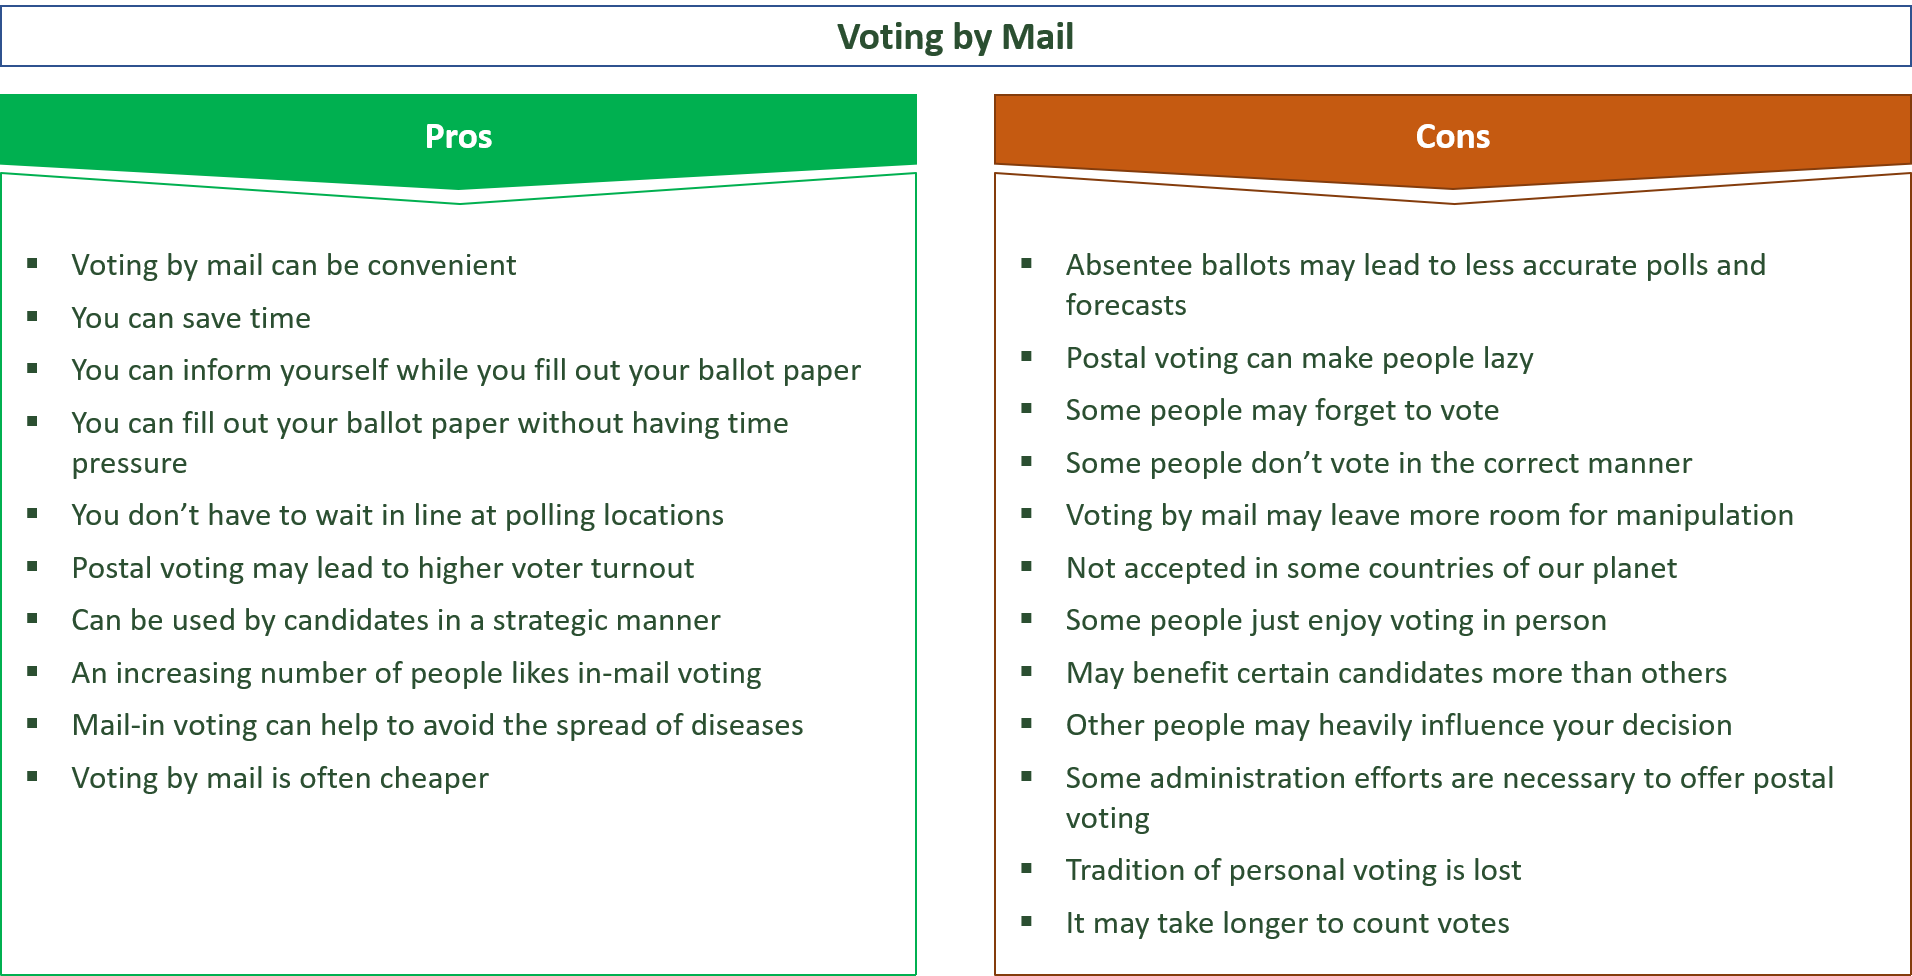 advantages and disadvantages of voting by mail